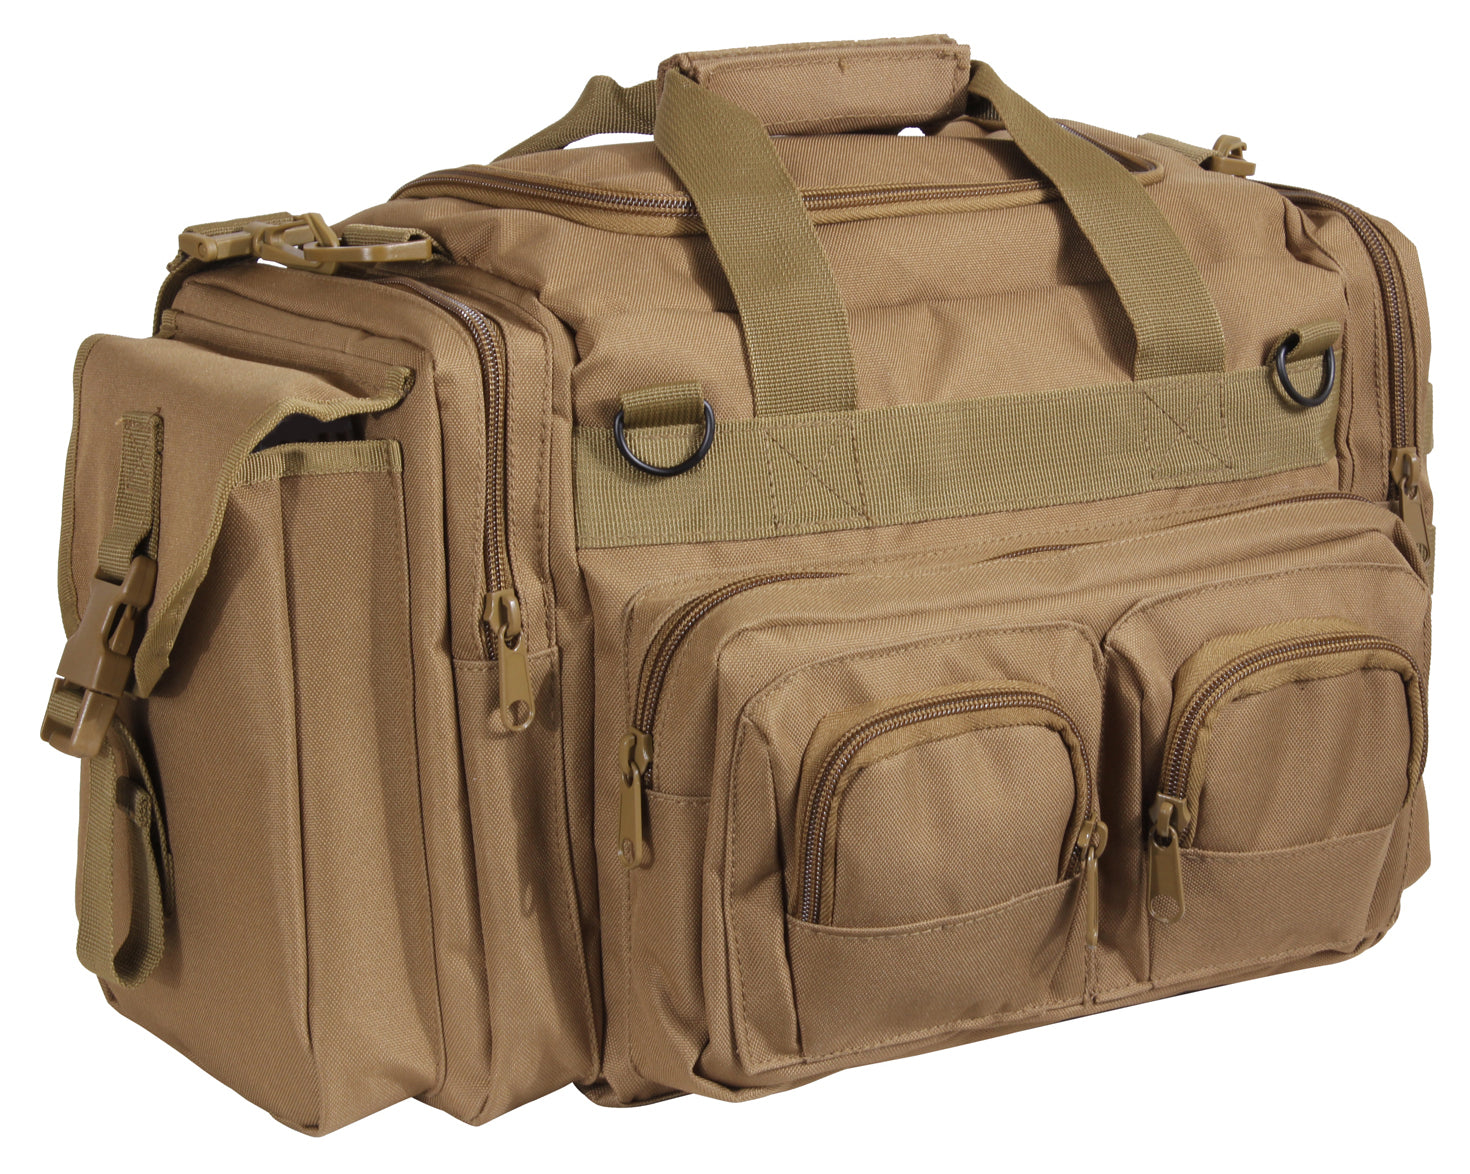 Rothco Concealed Carry Bag